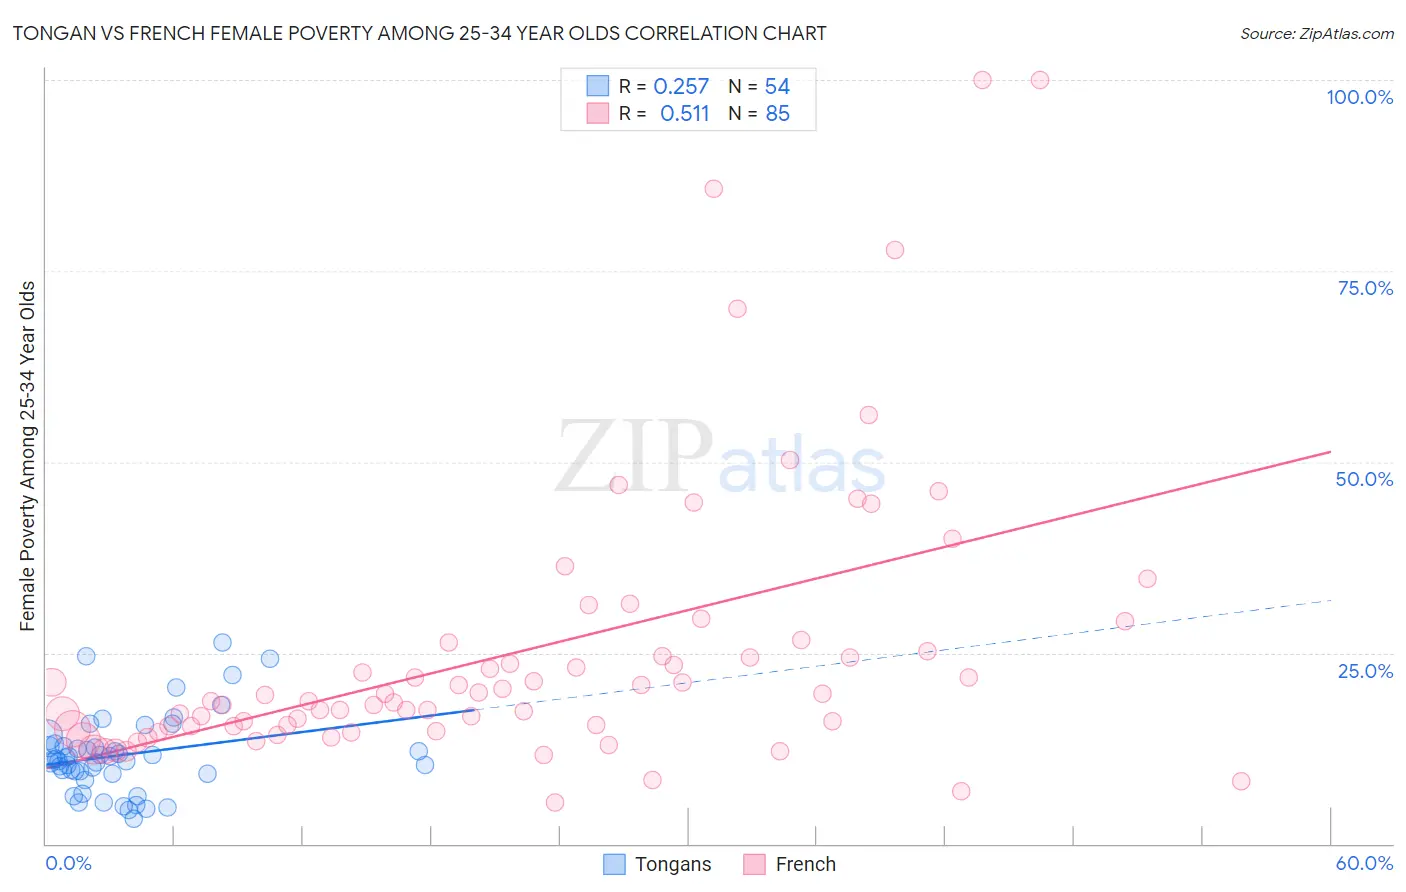 Tongan vs French Female Poverty Among 25-34 Year Olds